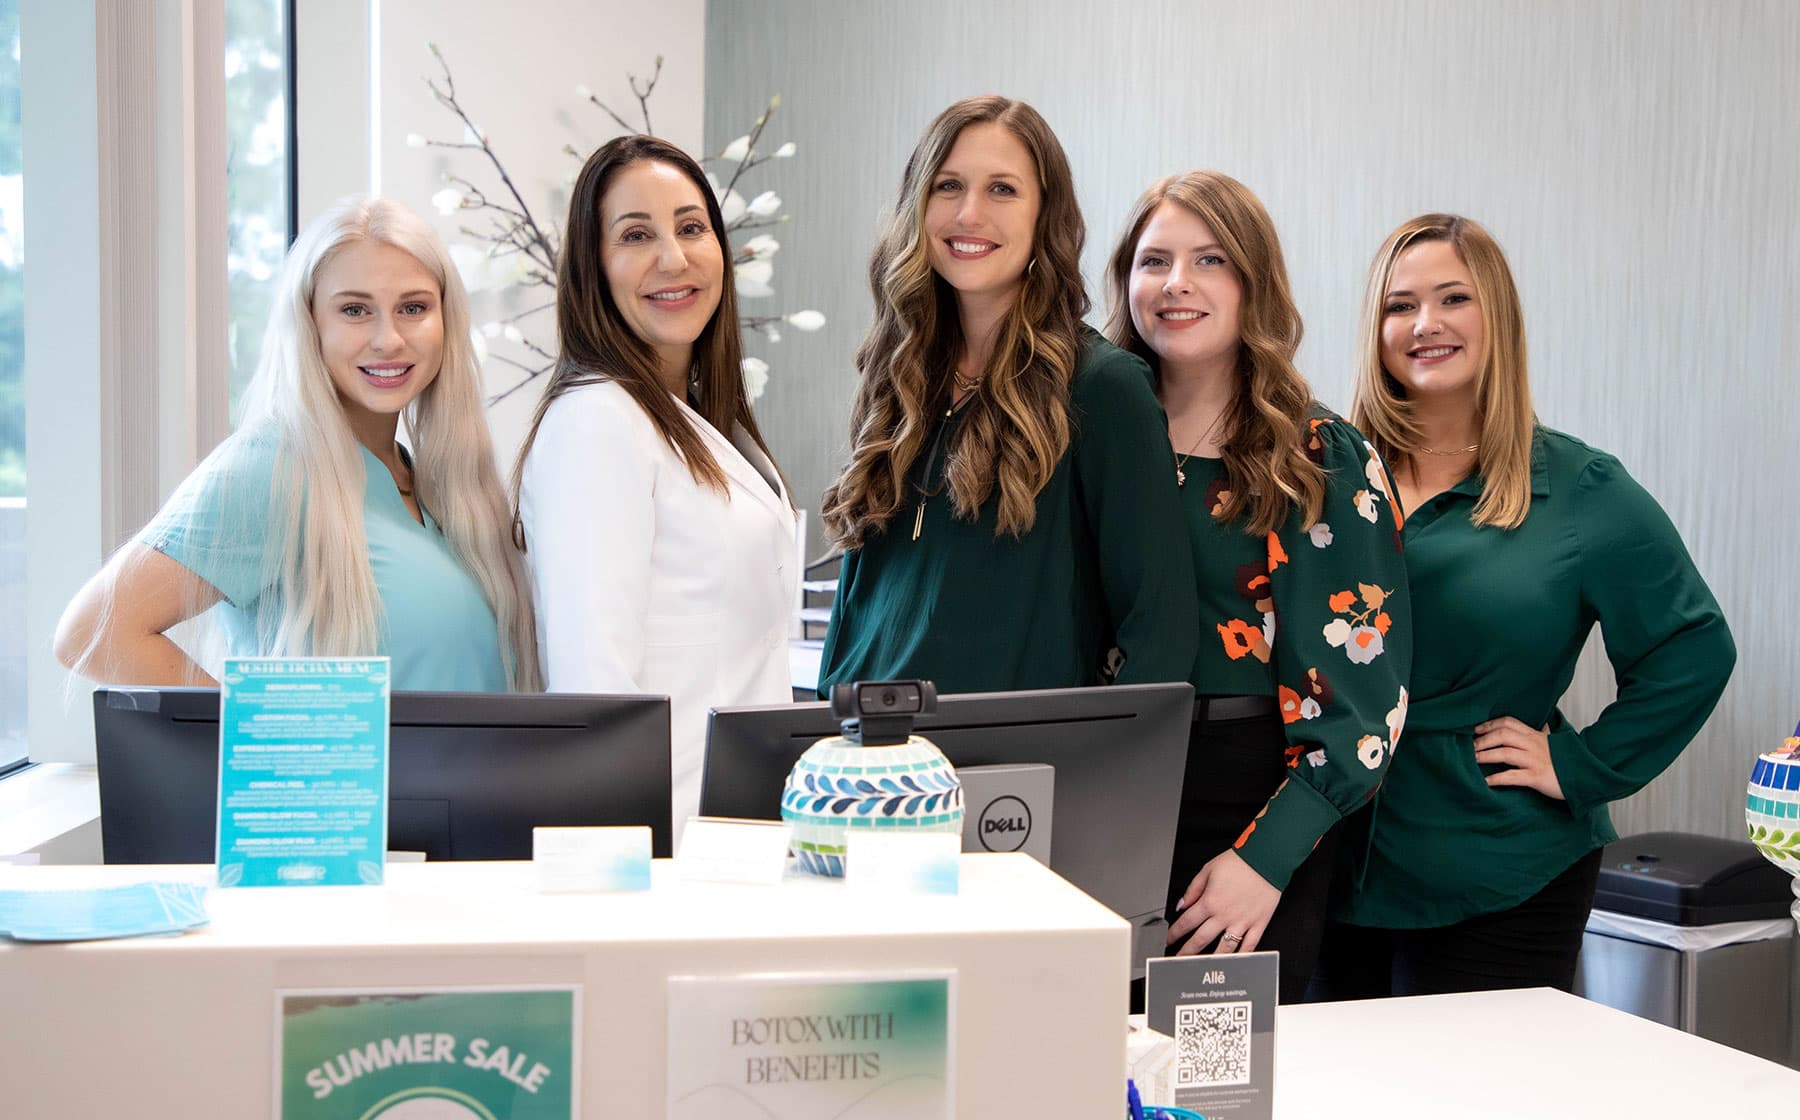 Group photo of staff smiling behind front desk